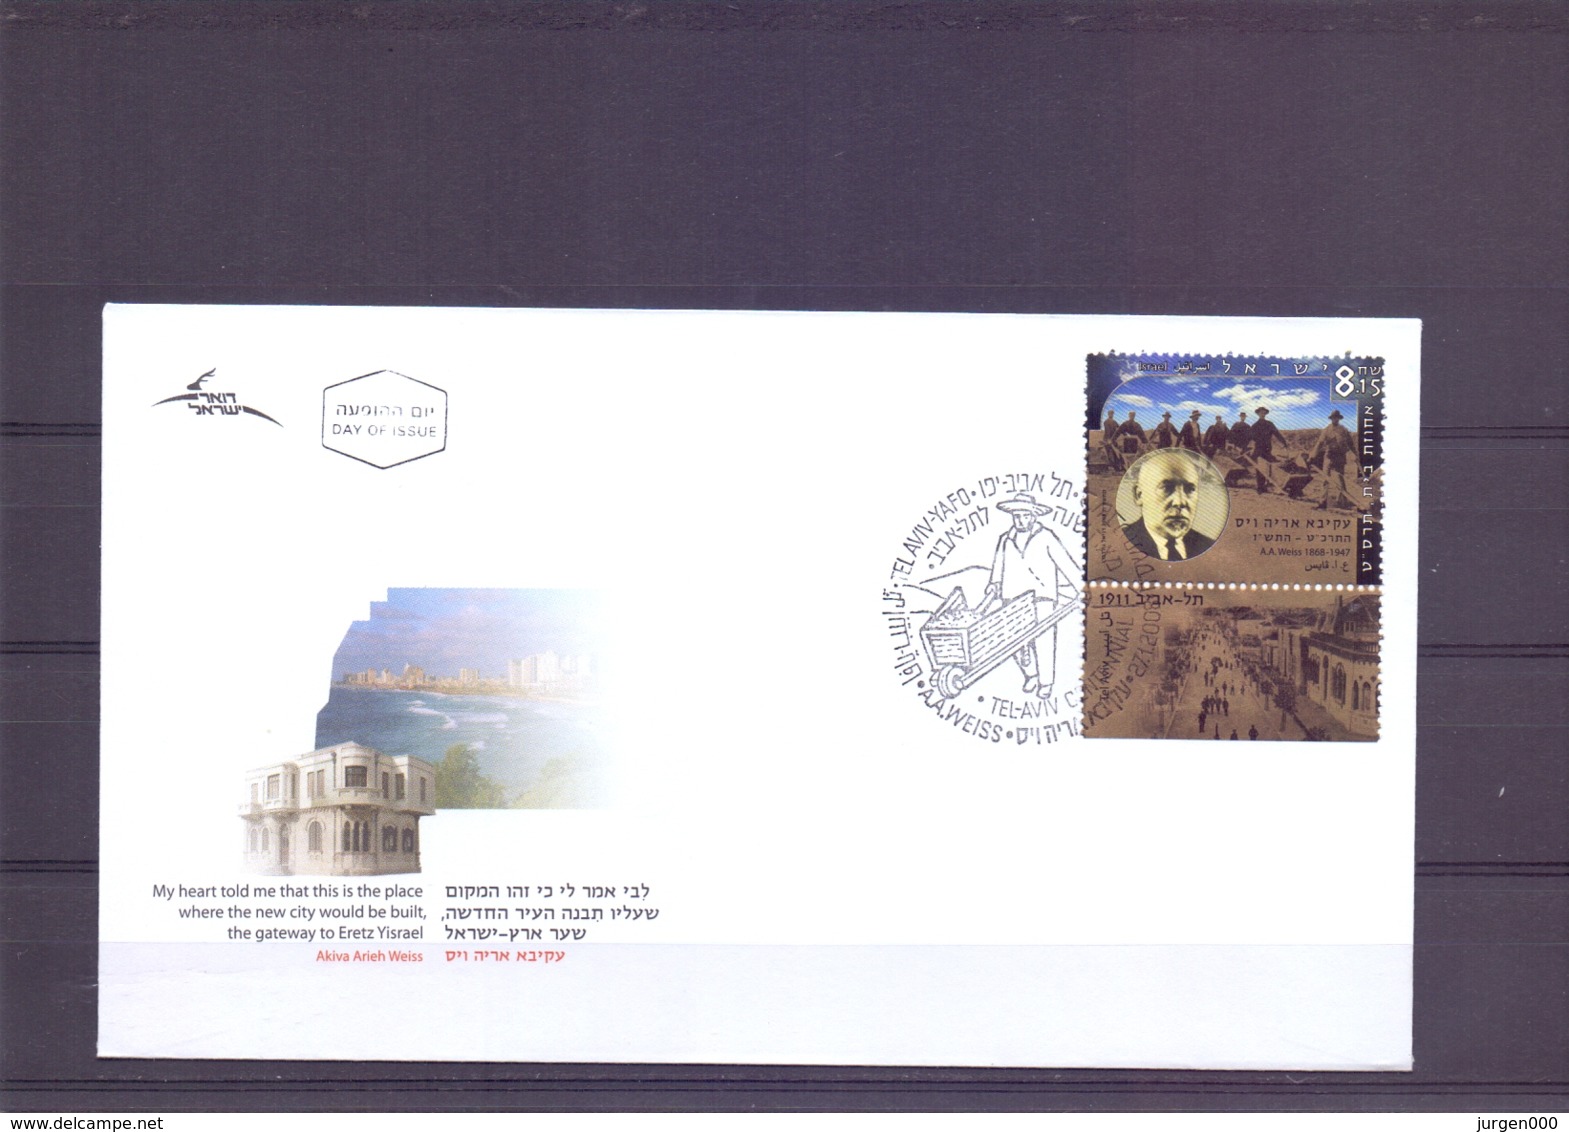 Israel - FDC - A.A. Weiss - Michel 1972 - Tel Aviv 27/1/2008   (RM14857) - Covers & Documents